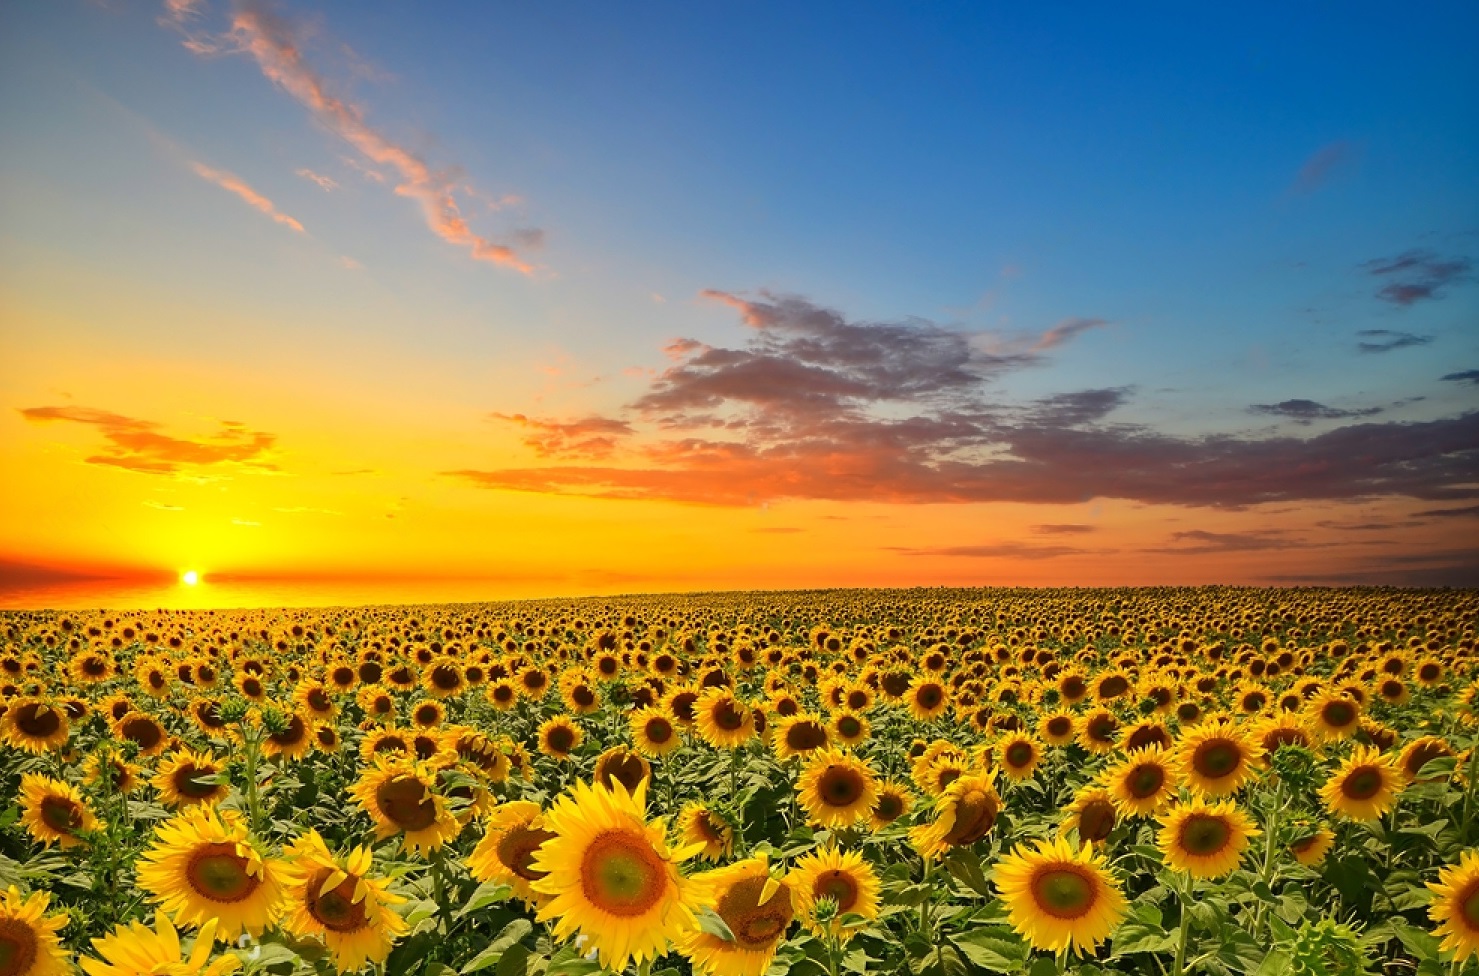 Sunflower farming: Growing sunshine with advantageous effects on the environment